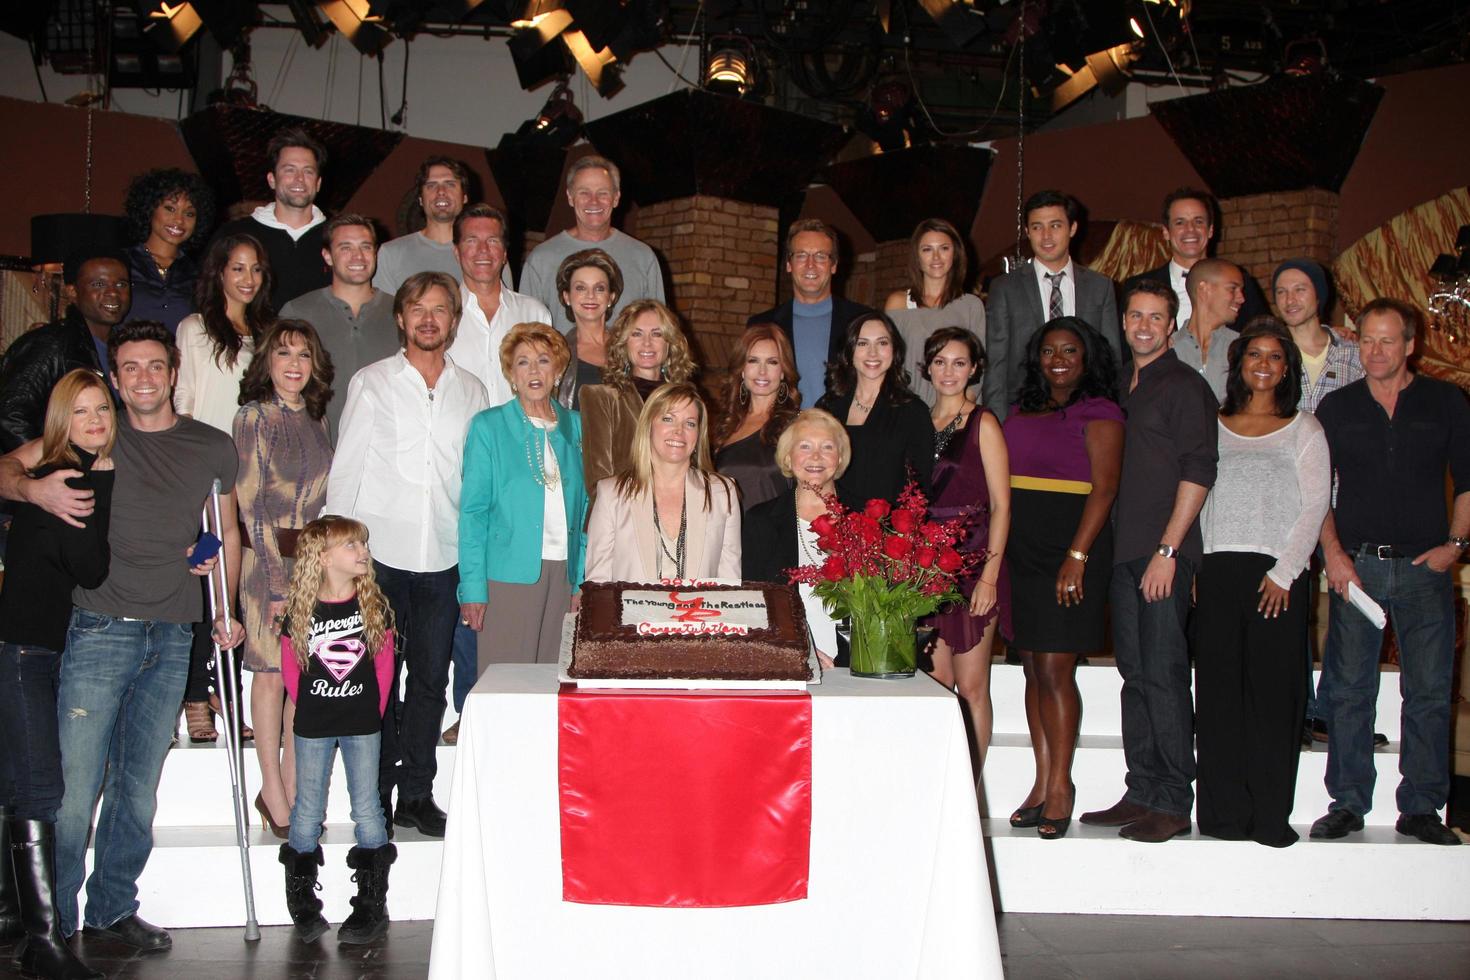 LOS ANGELES, MAR 24 - Young and Restless Cast at the Young and Restless 38th Anniversary On Set Press Party at CBS Television City on March 24, 2011 in Los Angeles, CA photo